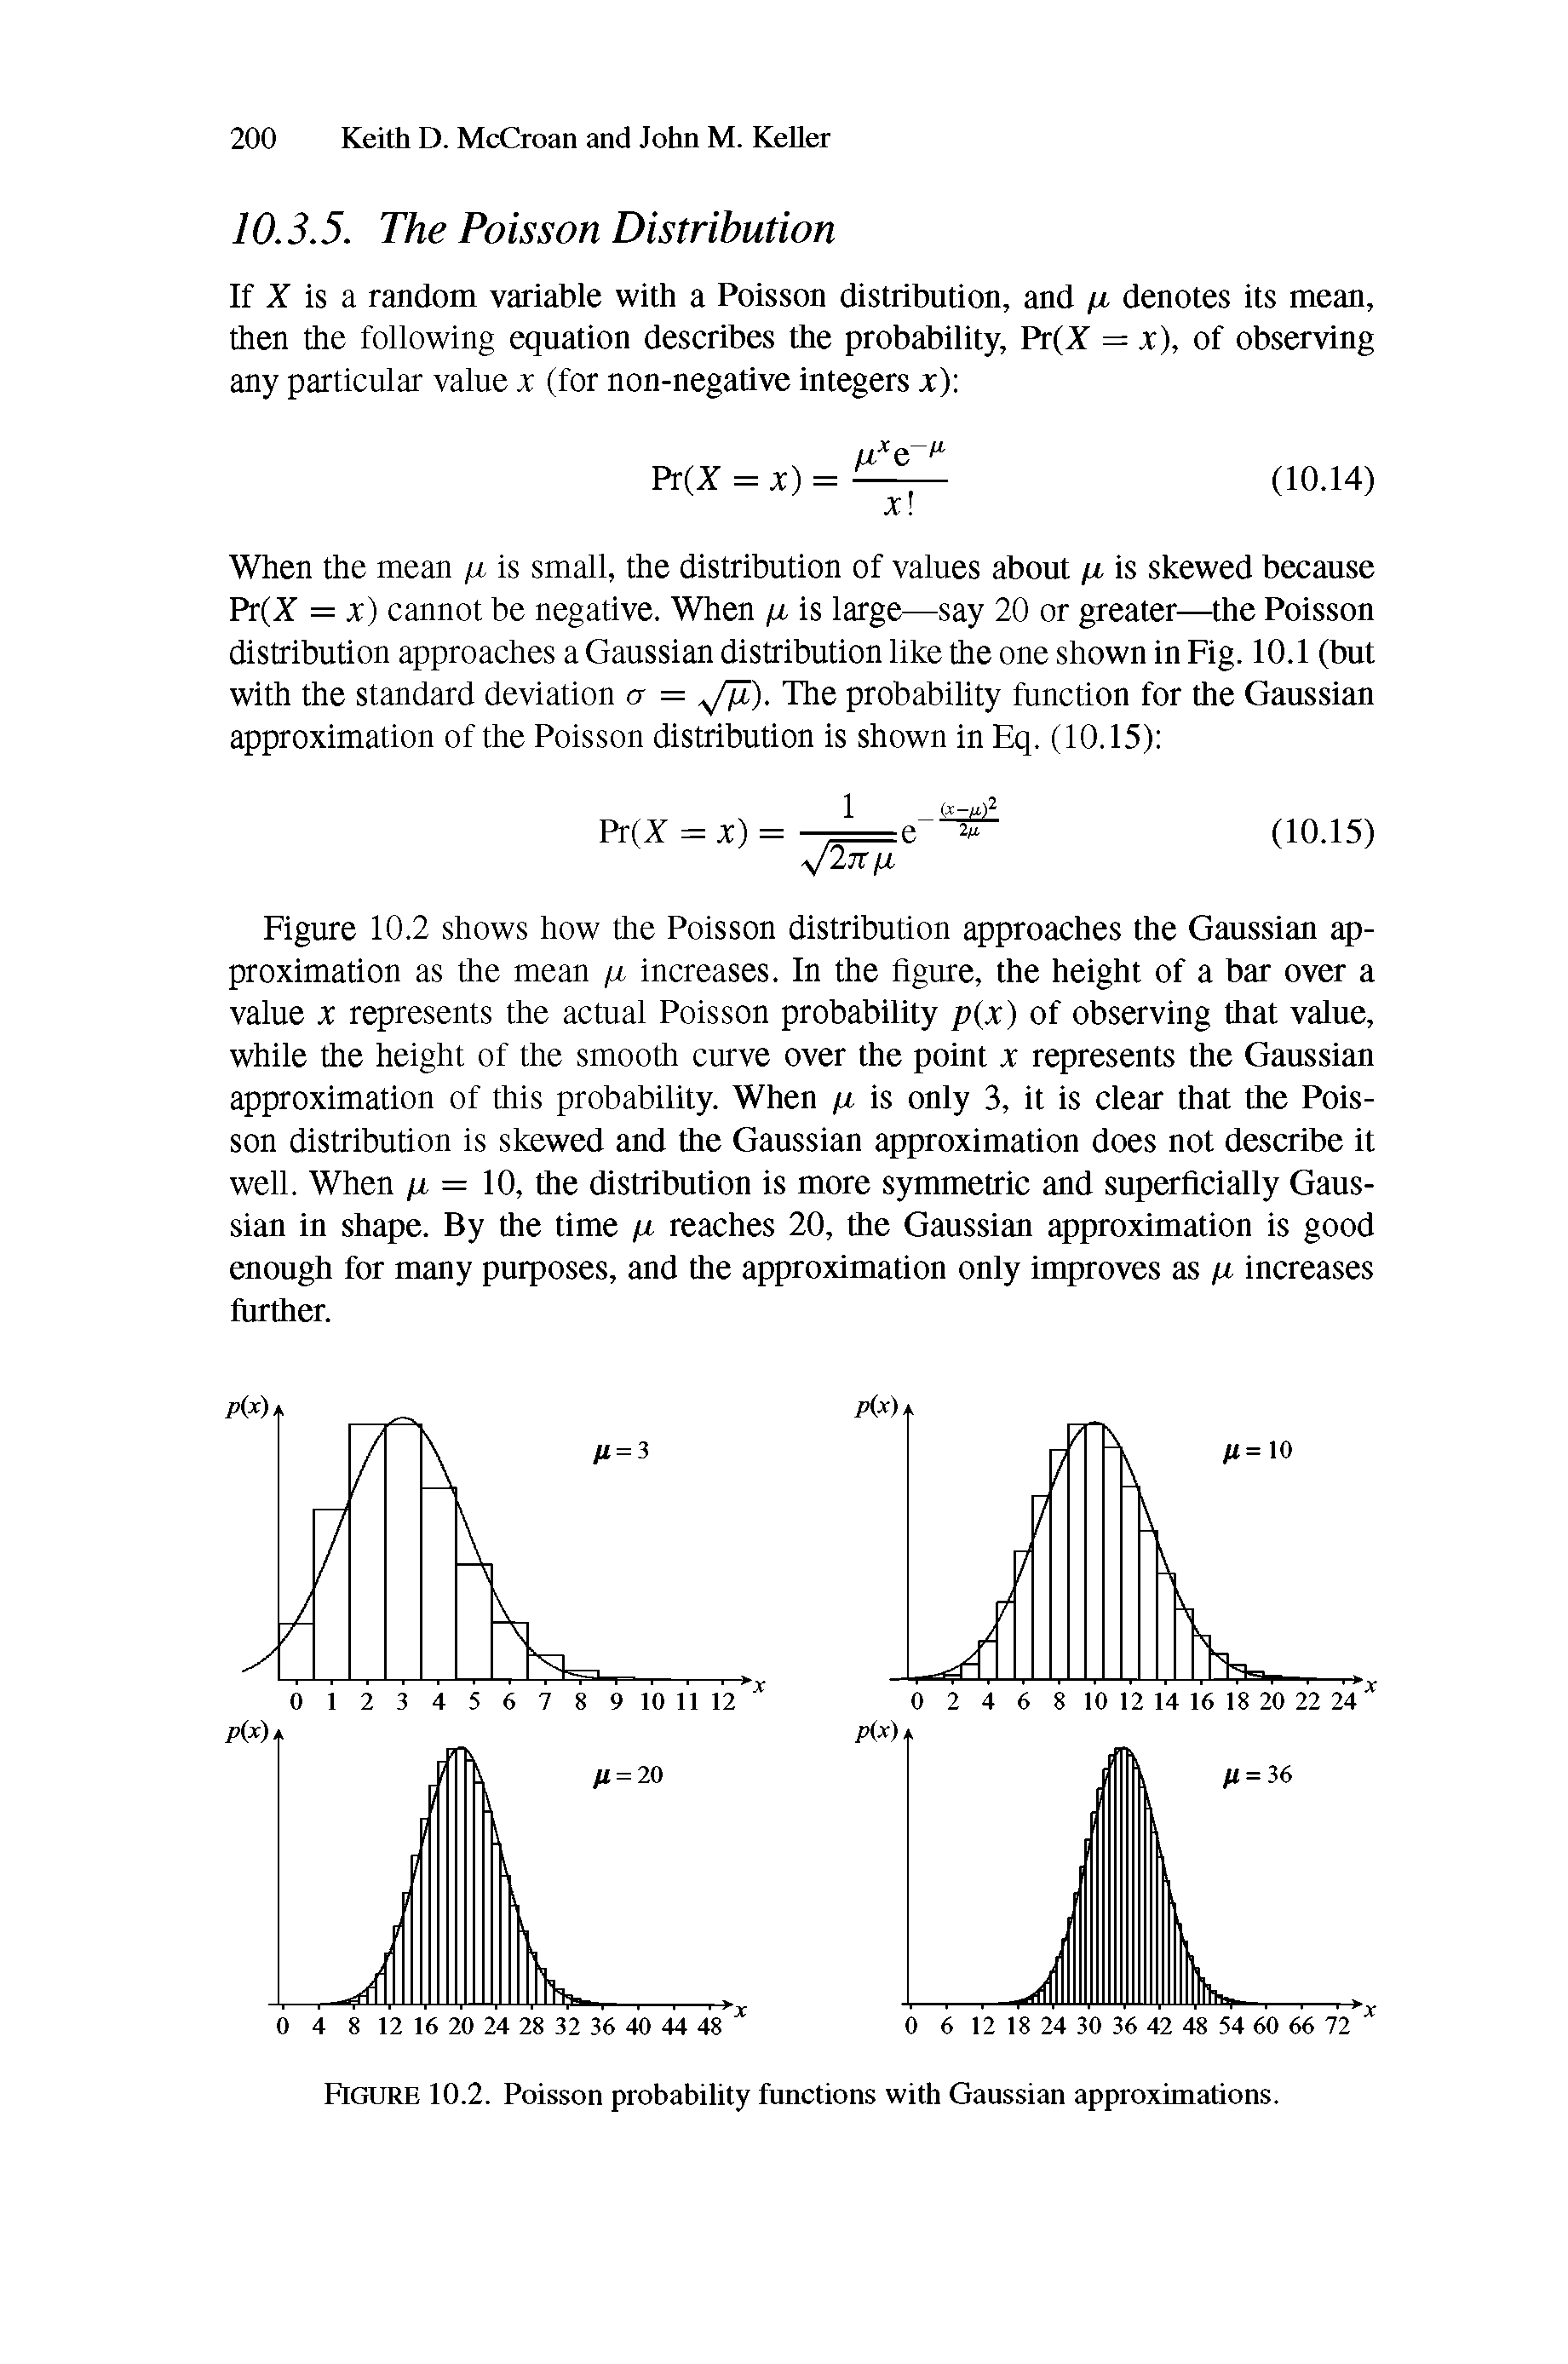 Figure 10.2. Poisson probability functions with Gaussian approximations.